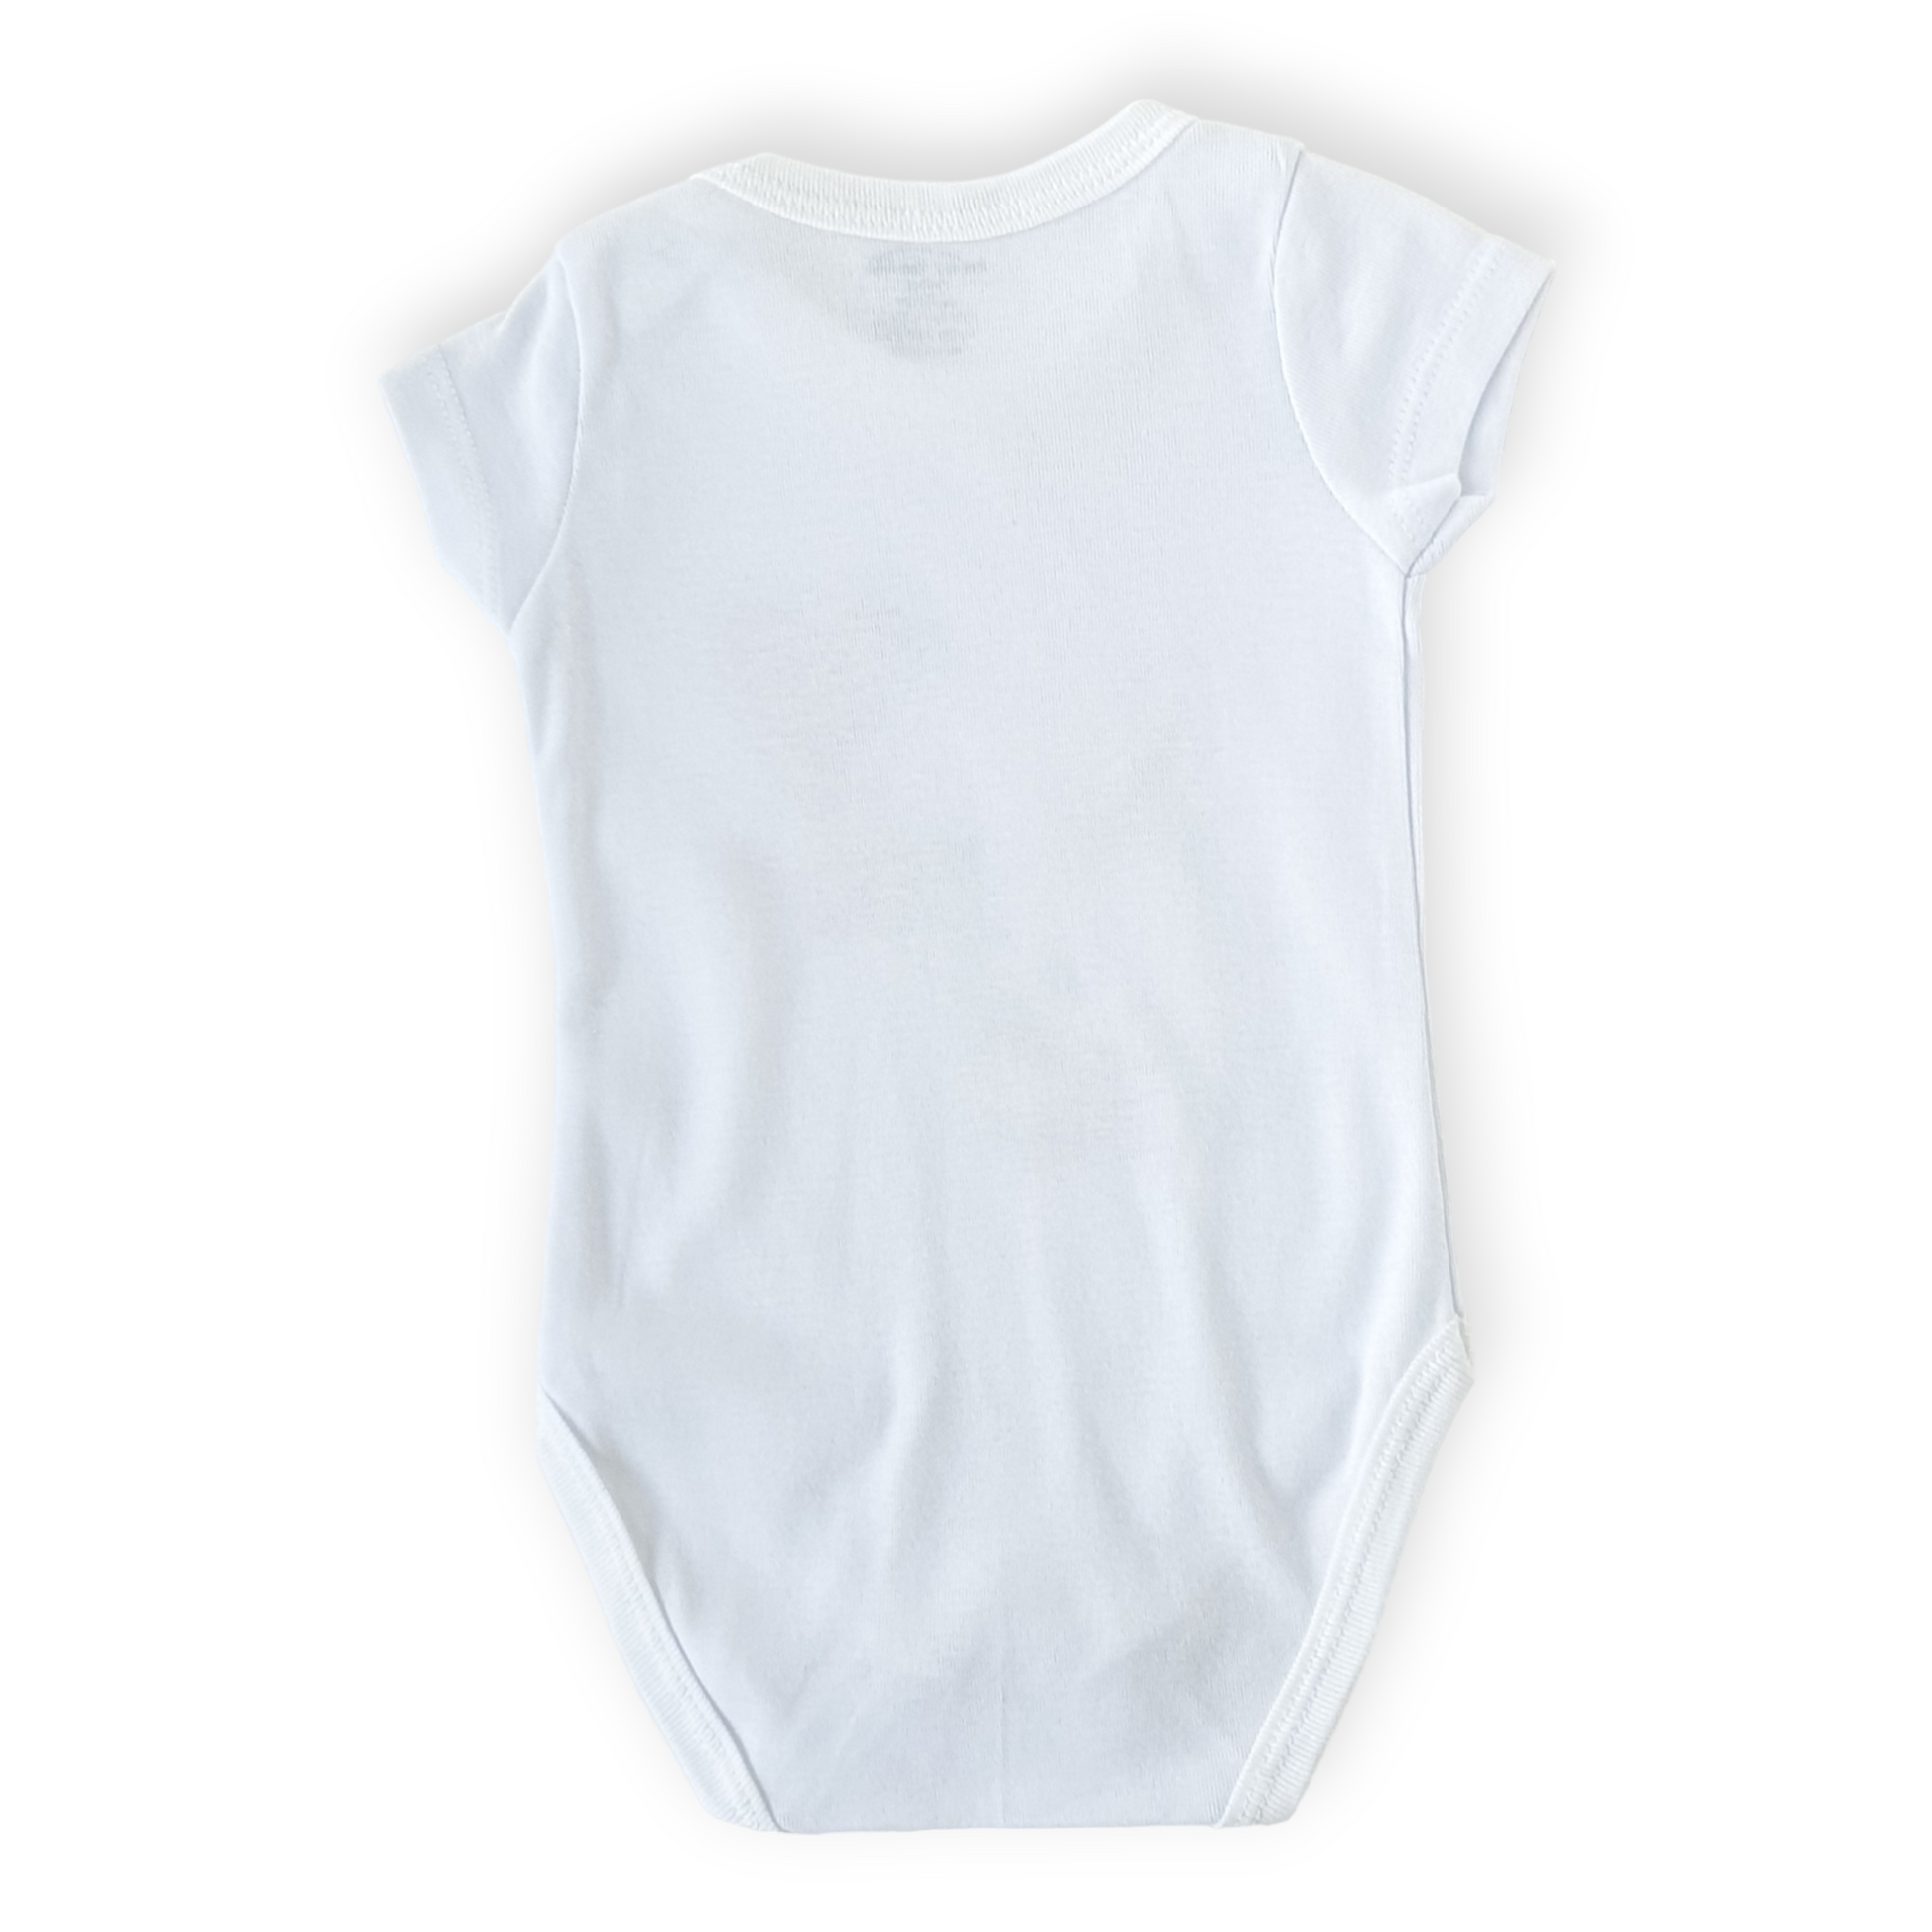 I Love You Baby Body-Body, Bodysuit, Boy, Catboy, Catgirl, Catunisex, Creeper, Girl, Heart, Onesie, Red, Short Sleeve, SS23, White-Fuar Baby-[Too Twee]-[Tootwee]-[baby]-[newborn]-[clothes]-[essentials]-[toys]-[Lebanon]